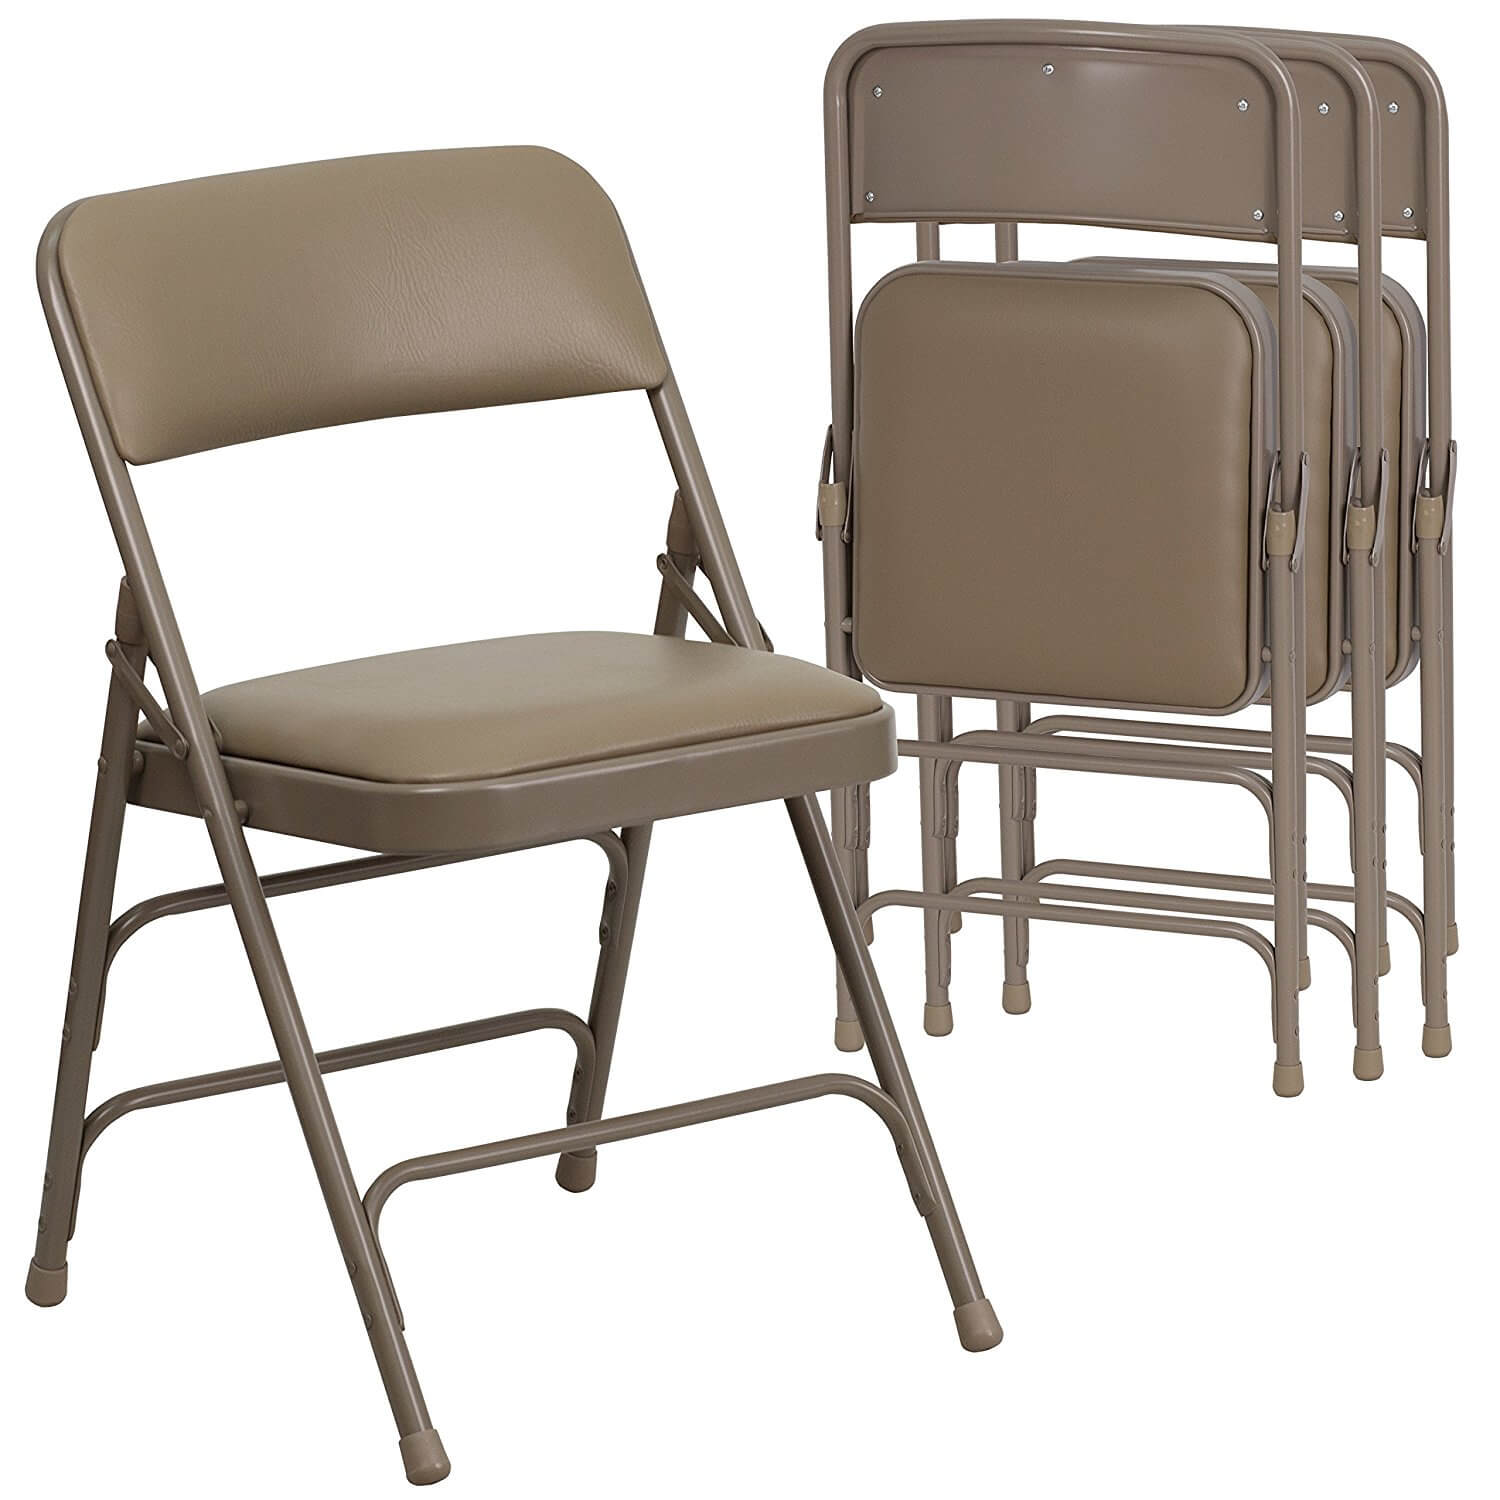 Folding Chairs - Party Rentals NYC | Party Rental Nation